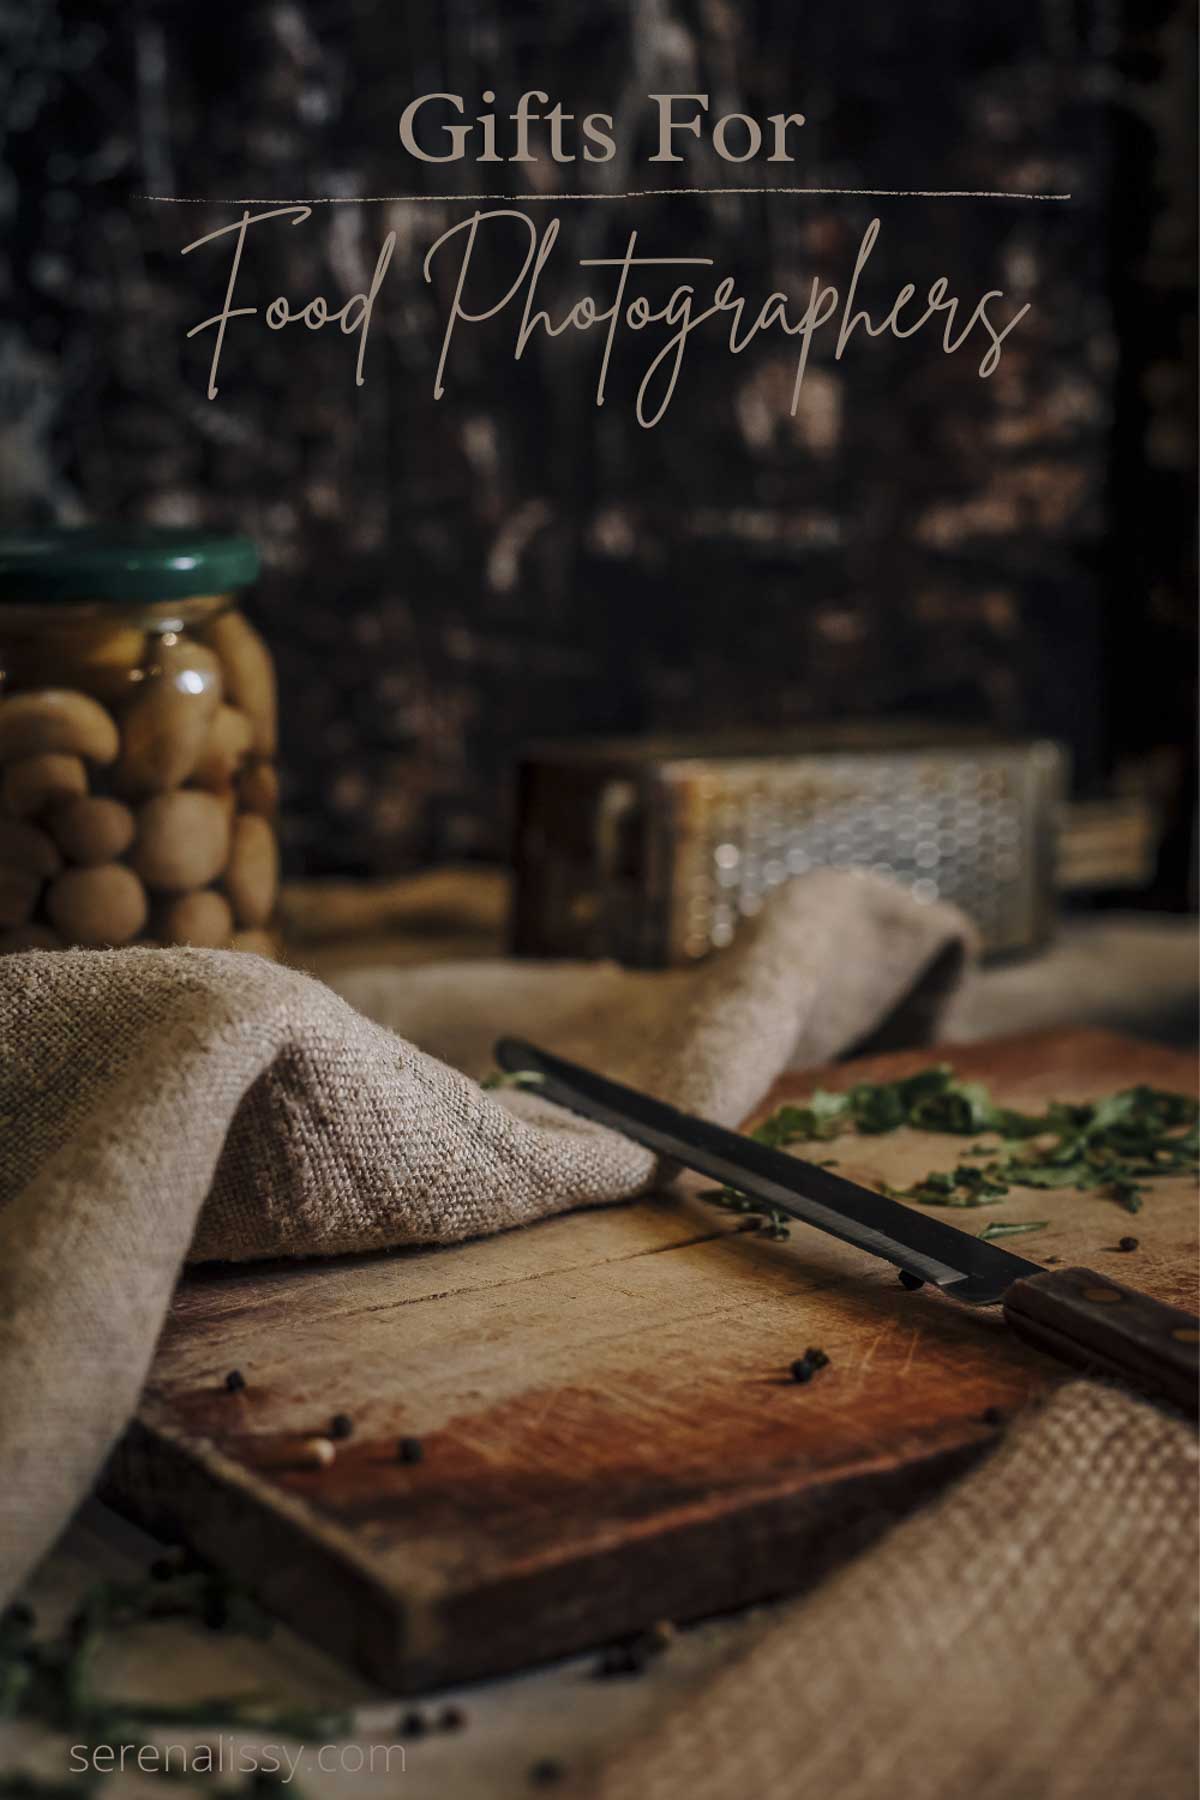 Gifts For Food Photographers